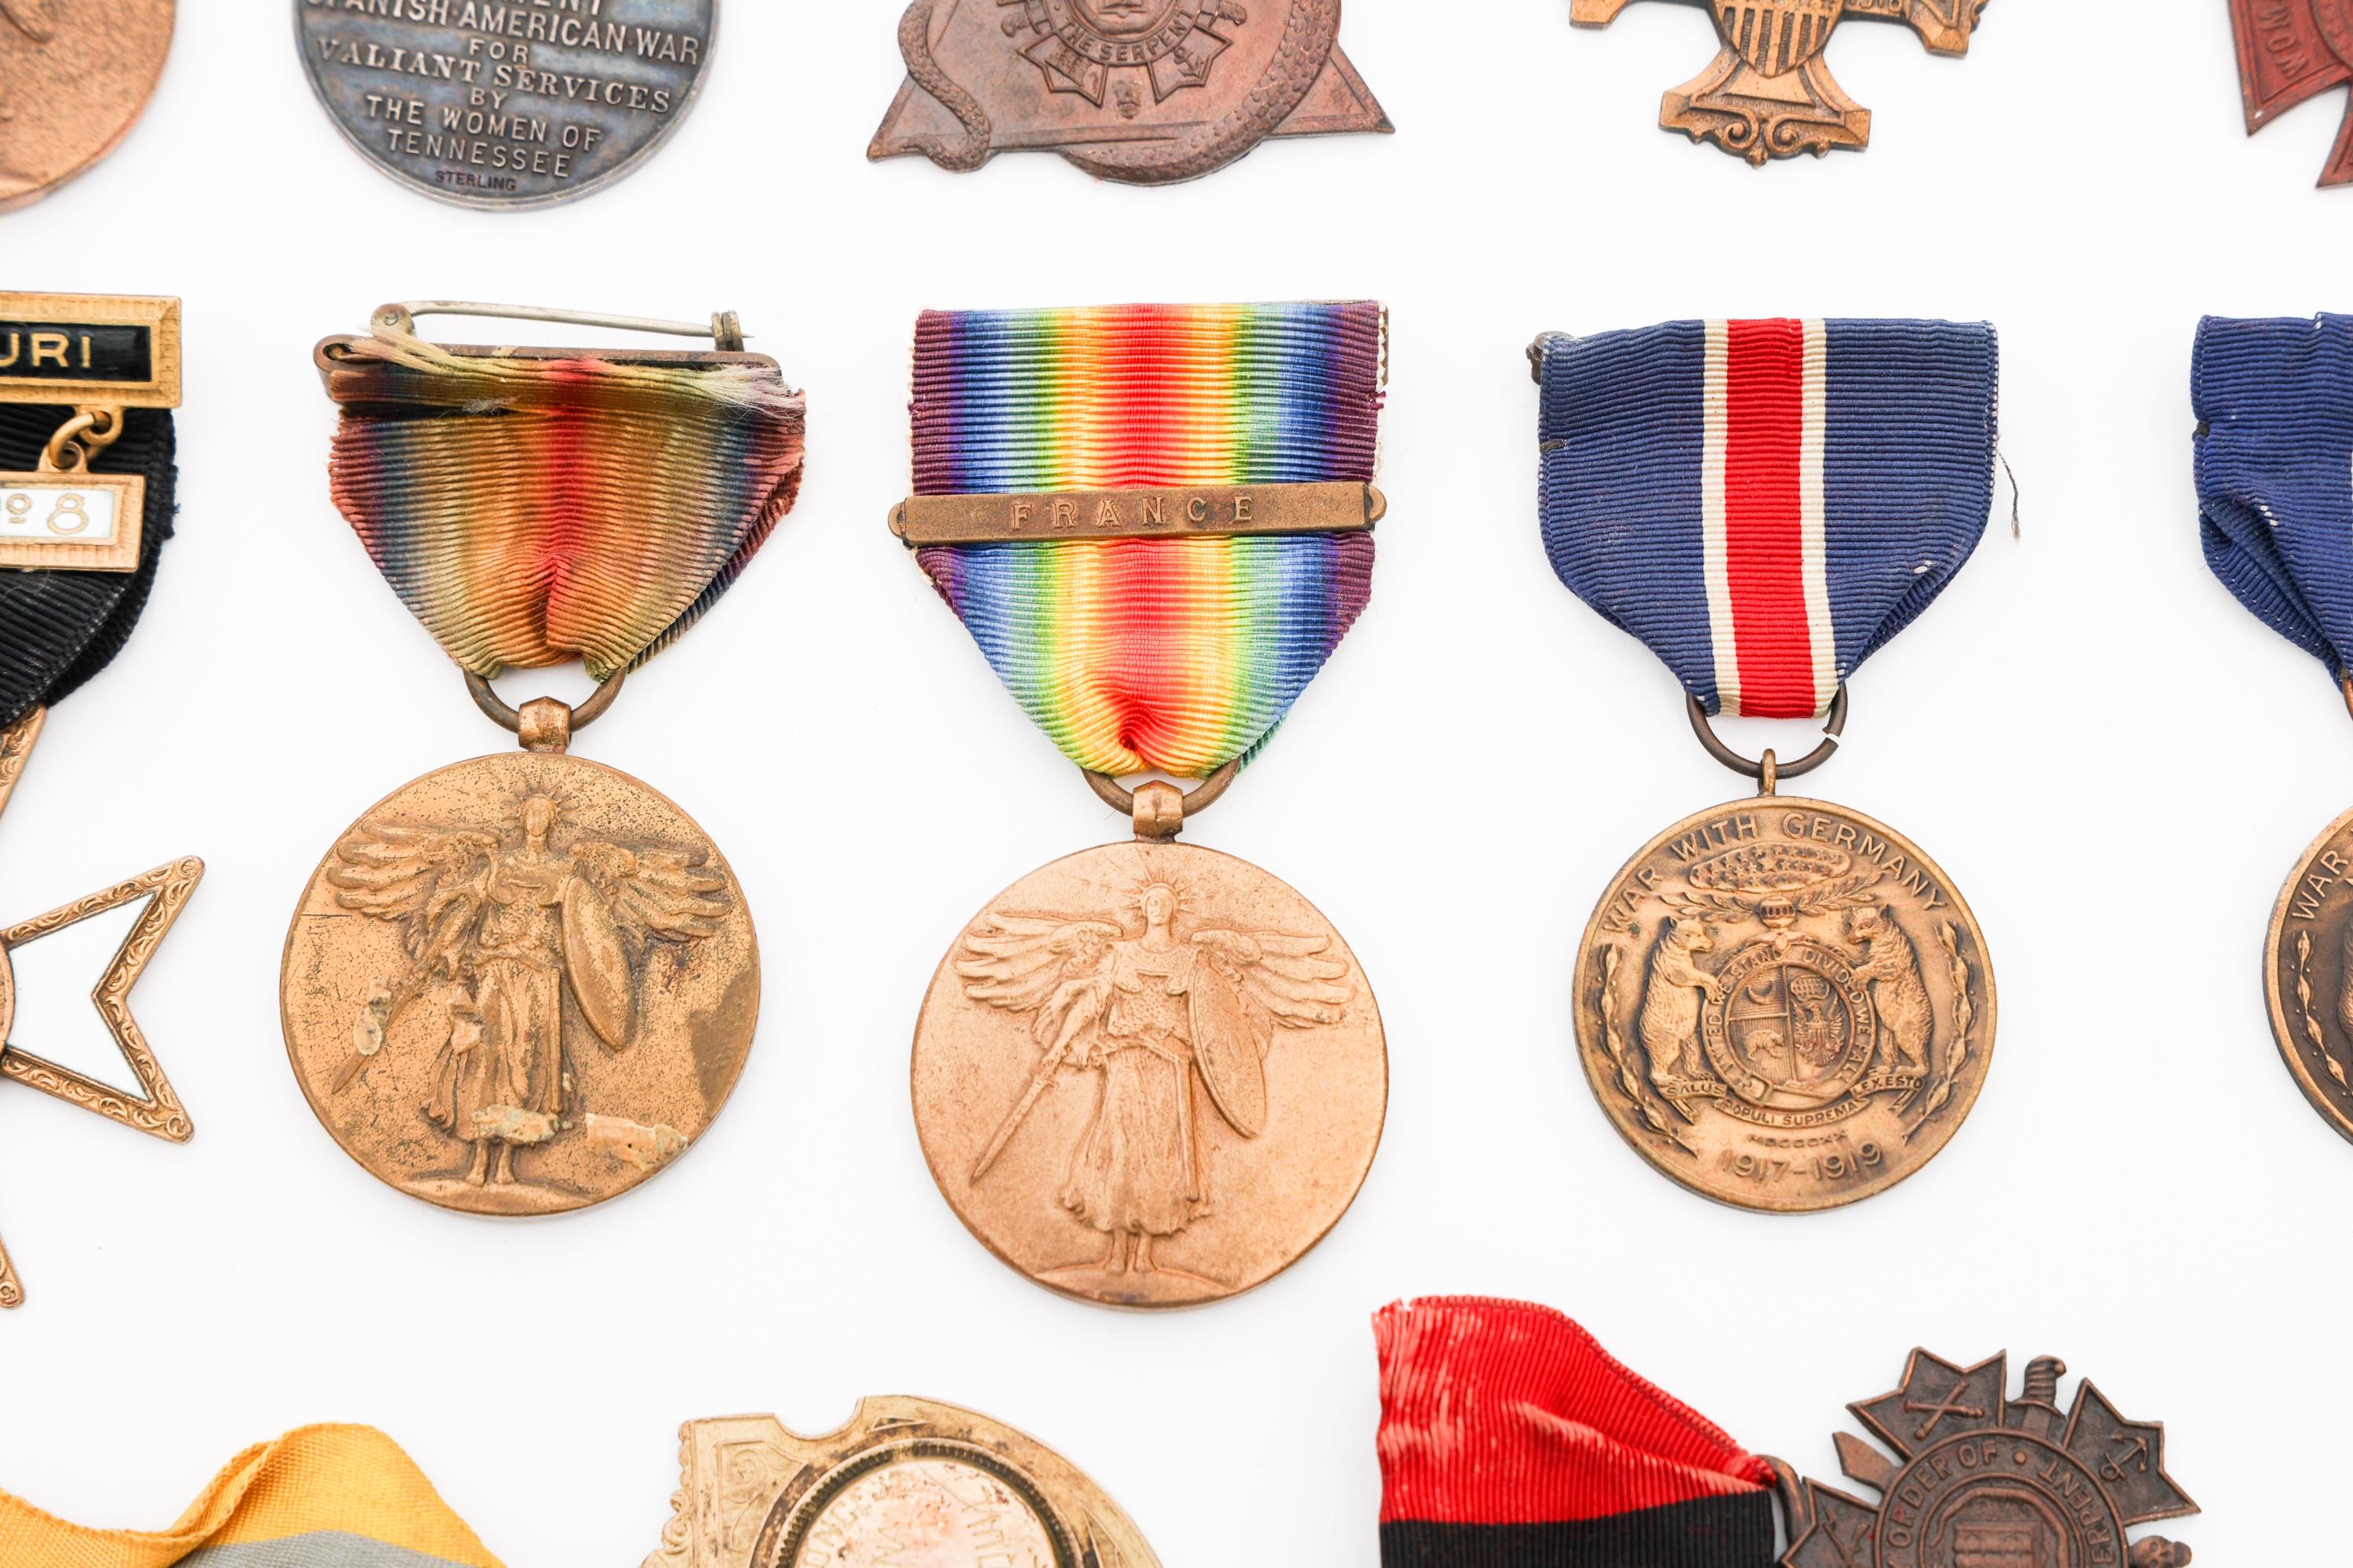 WWI ERA US STATE SERVICE & FRATERNAL MEDALS